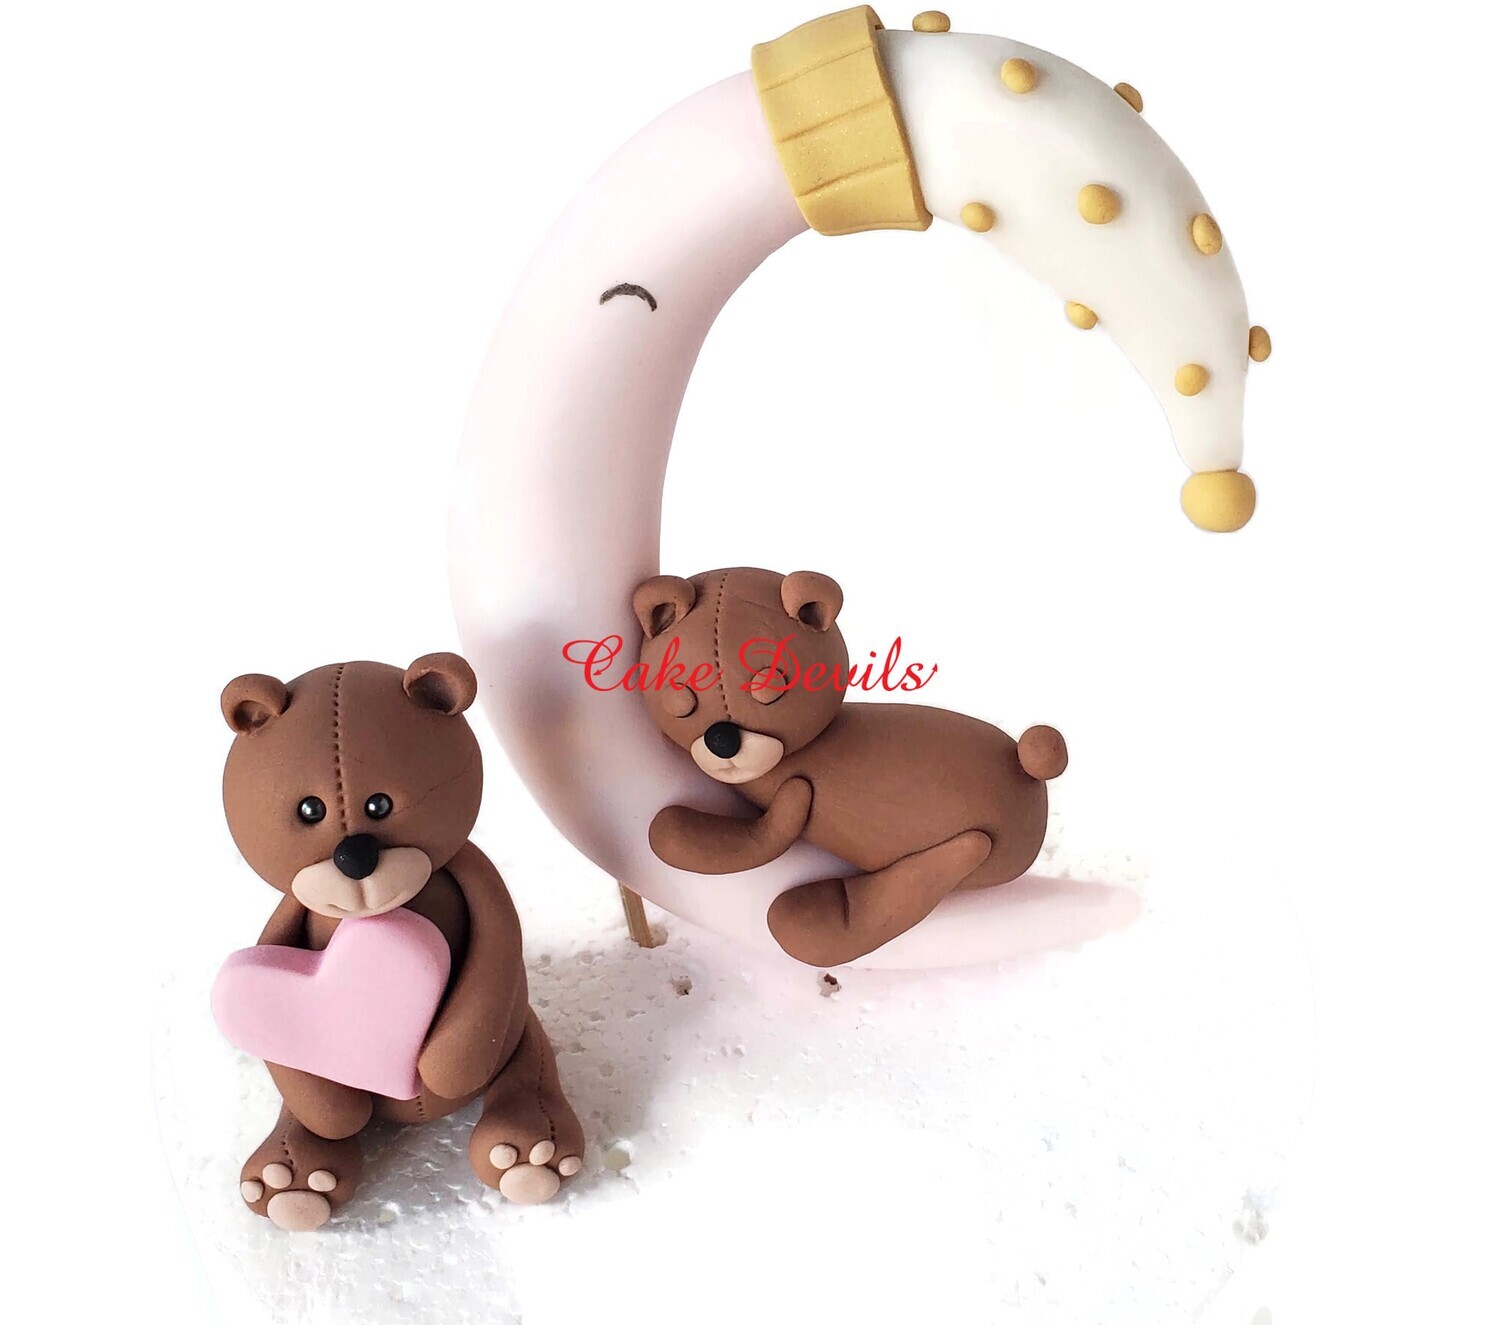 Fondant Teddy Bear Sleeping on Moon Cake Toppers, Also great for Baby Shower, 1st Birthday and more!